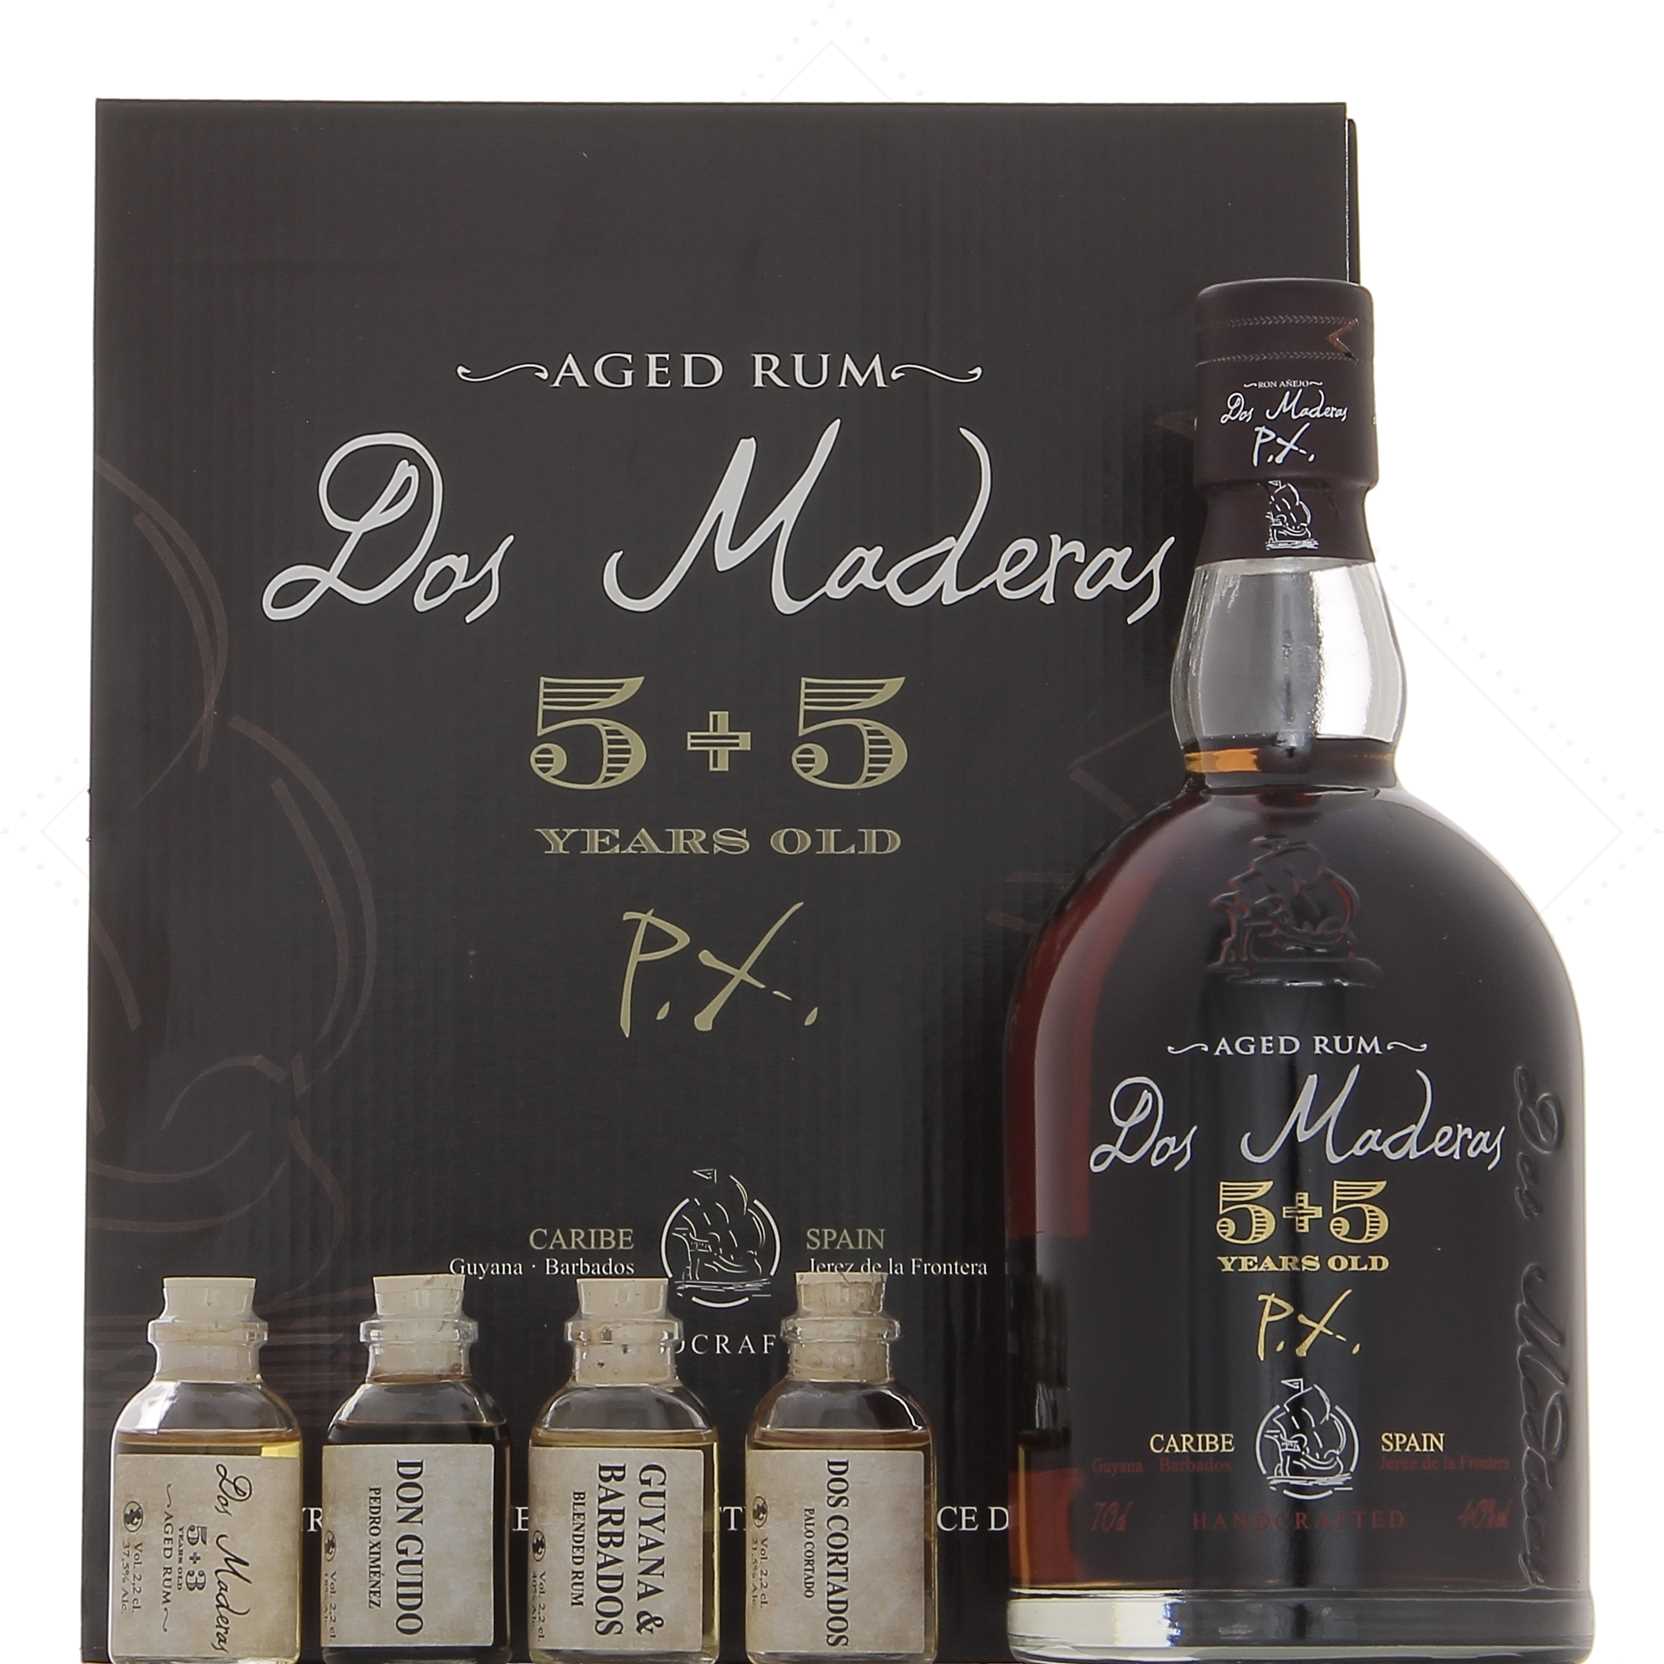 Attitude PX with 40° Dos Rhum 4 5+5 samples set - boxed Maderas